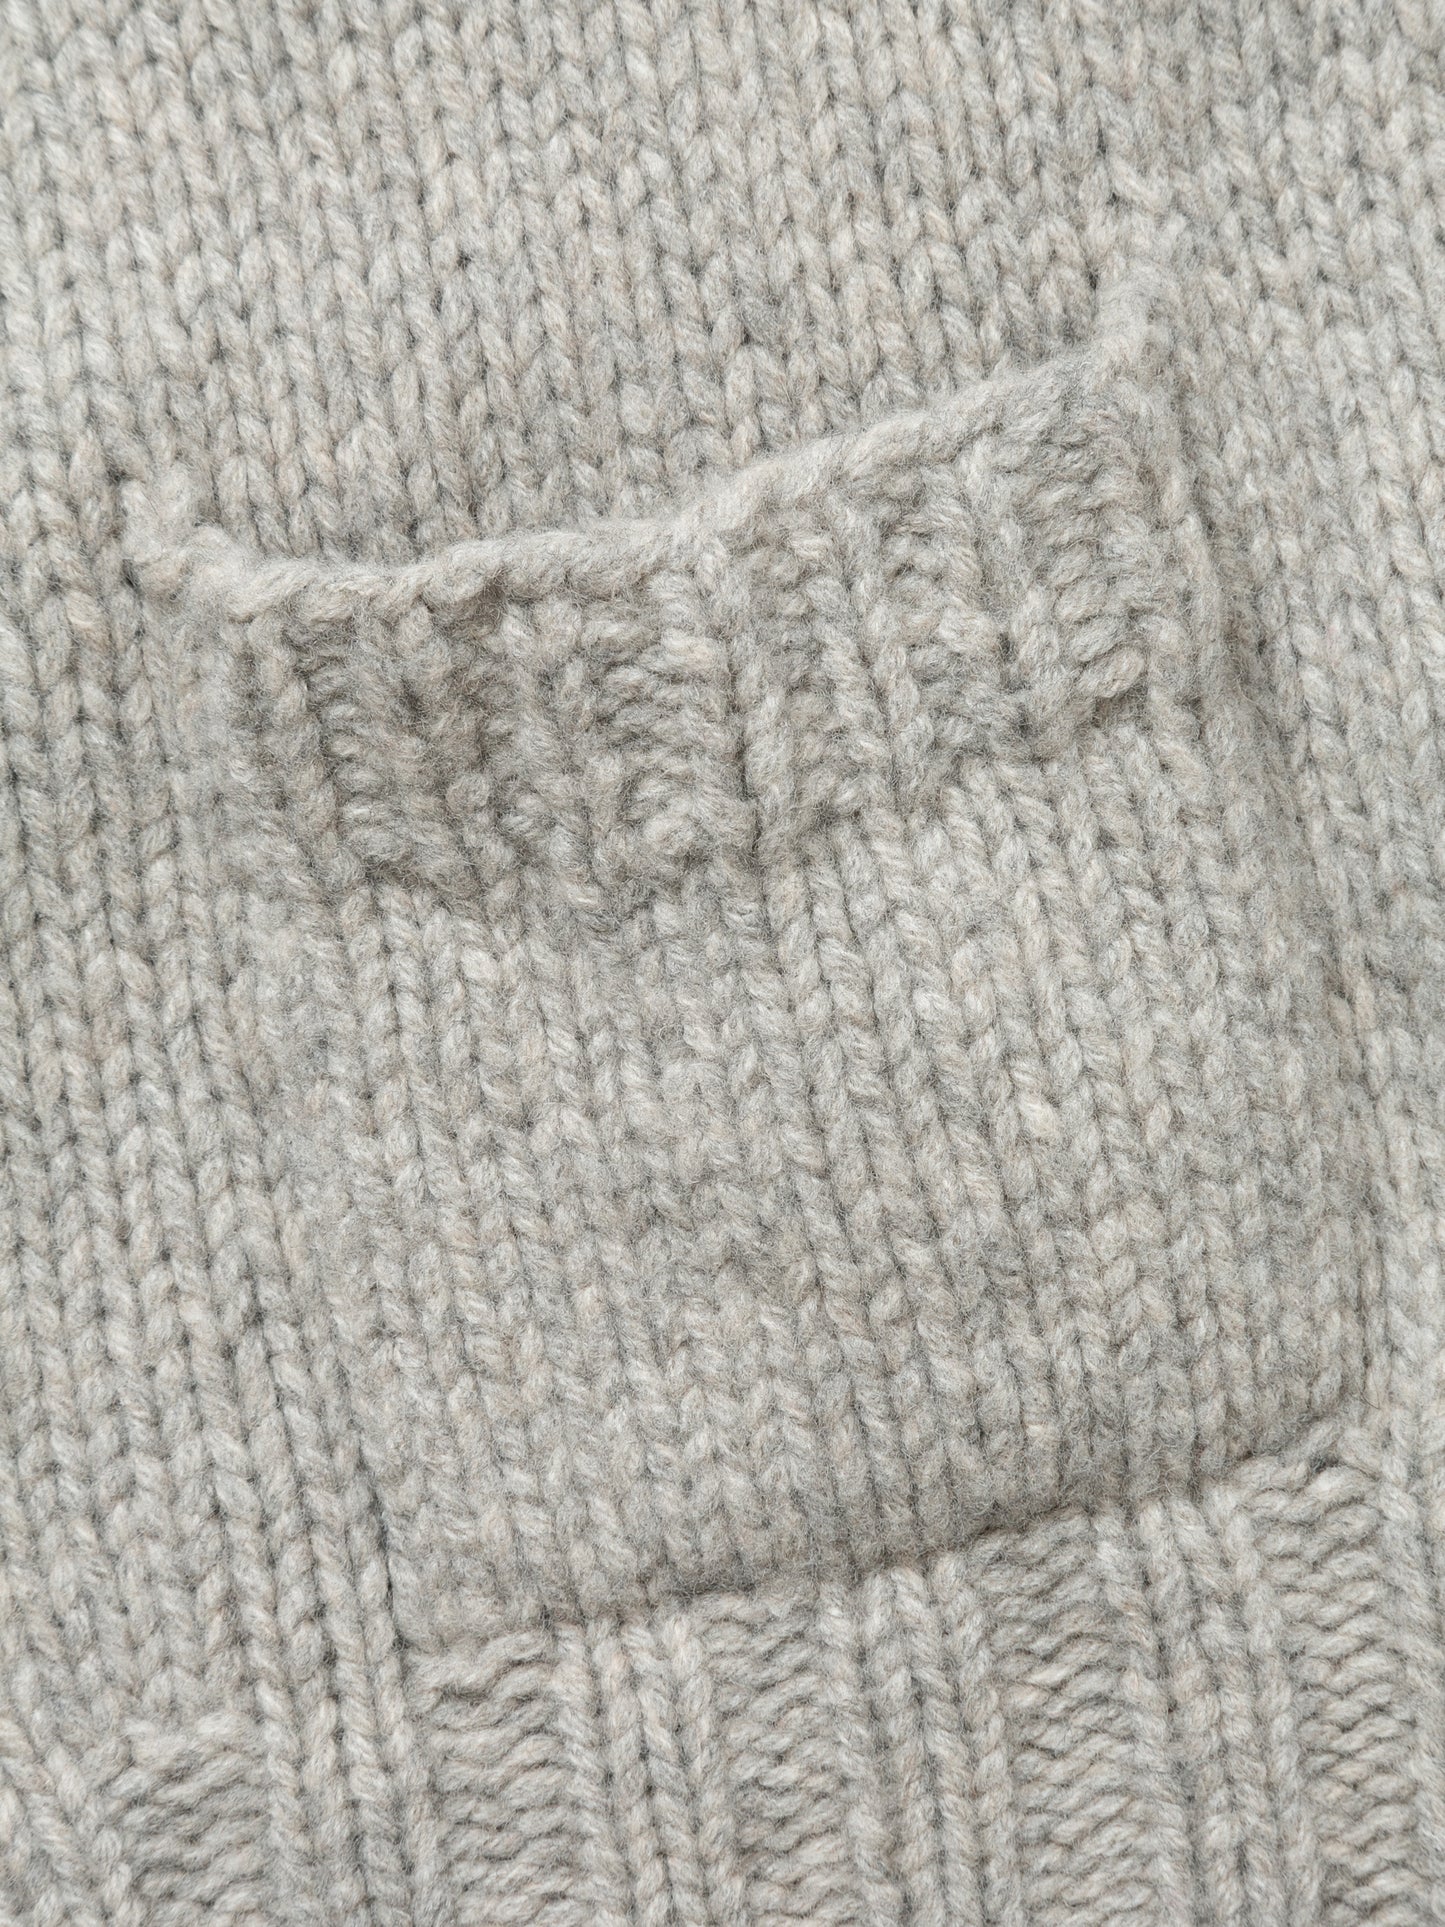 NOMADS CARDIGAN  HAND MADE WOOL KNIT AM-K0111 Gray